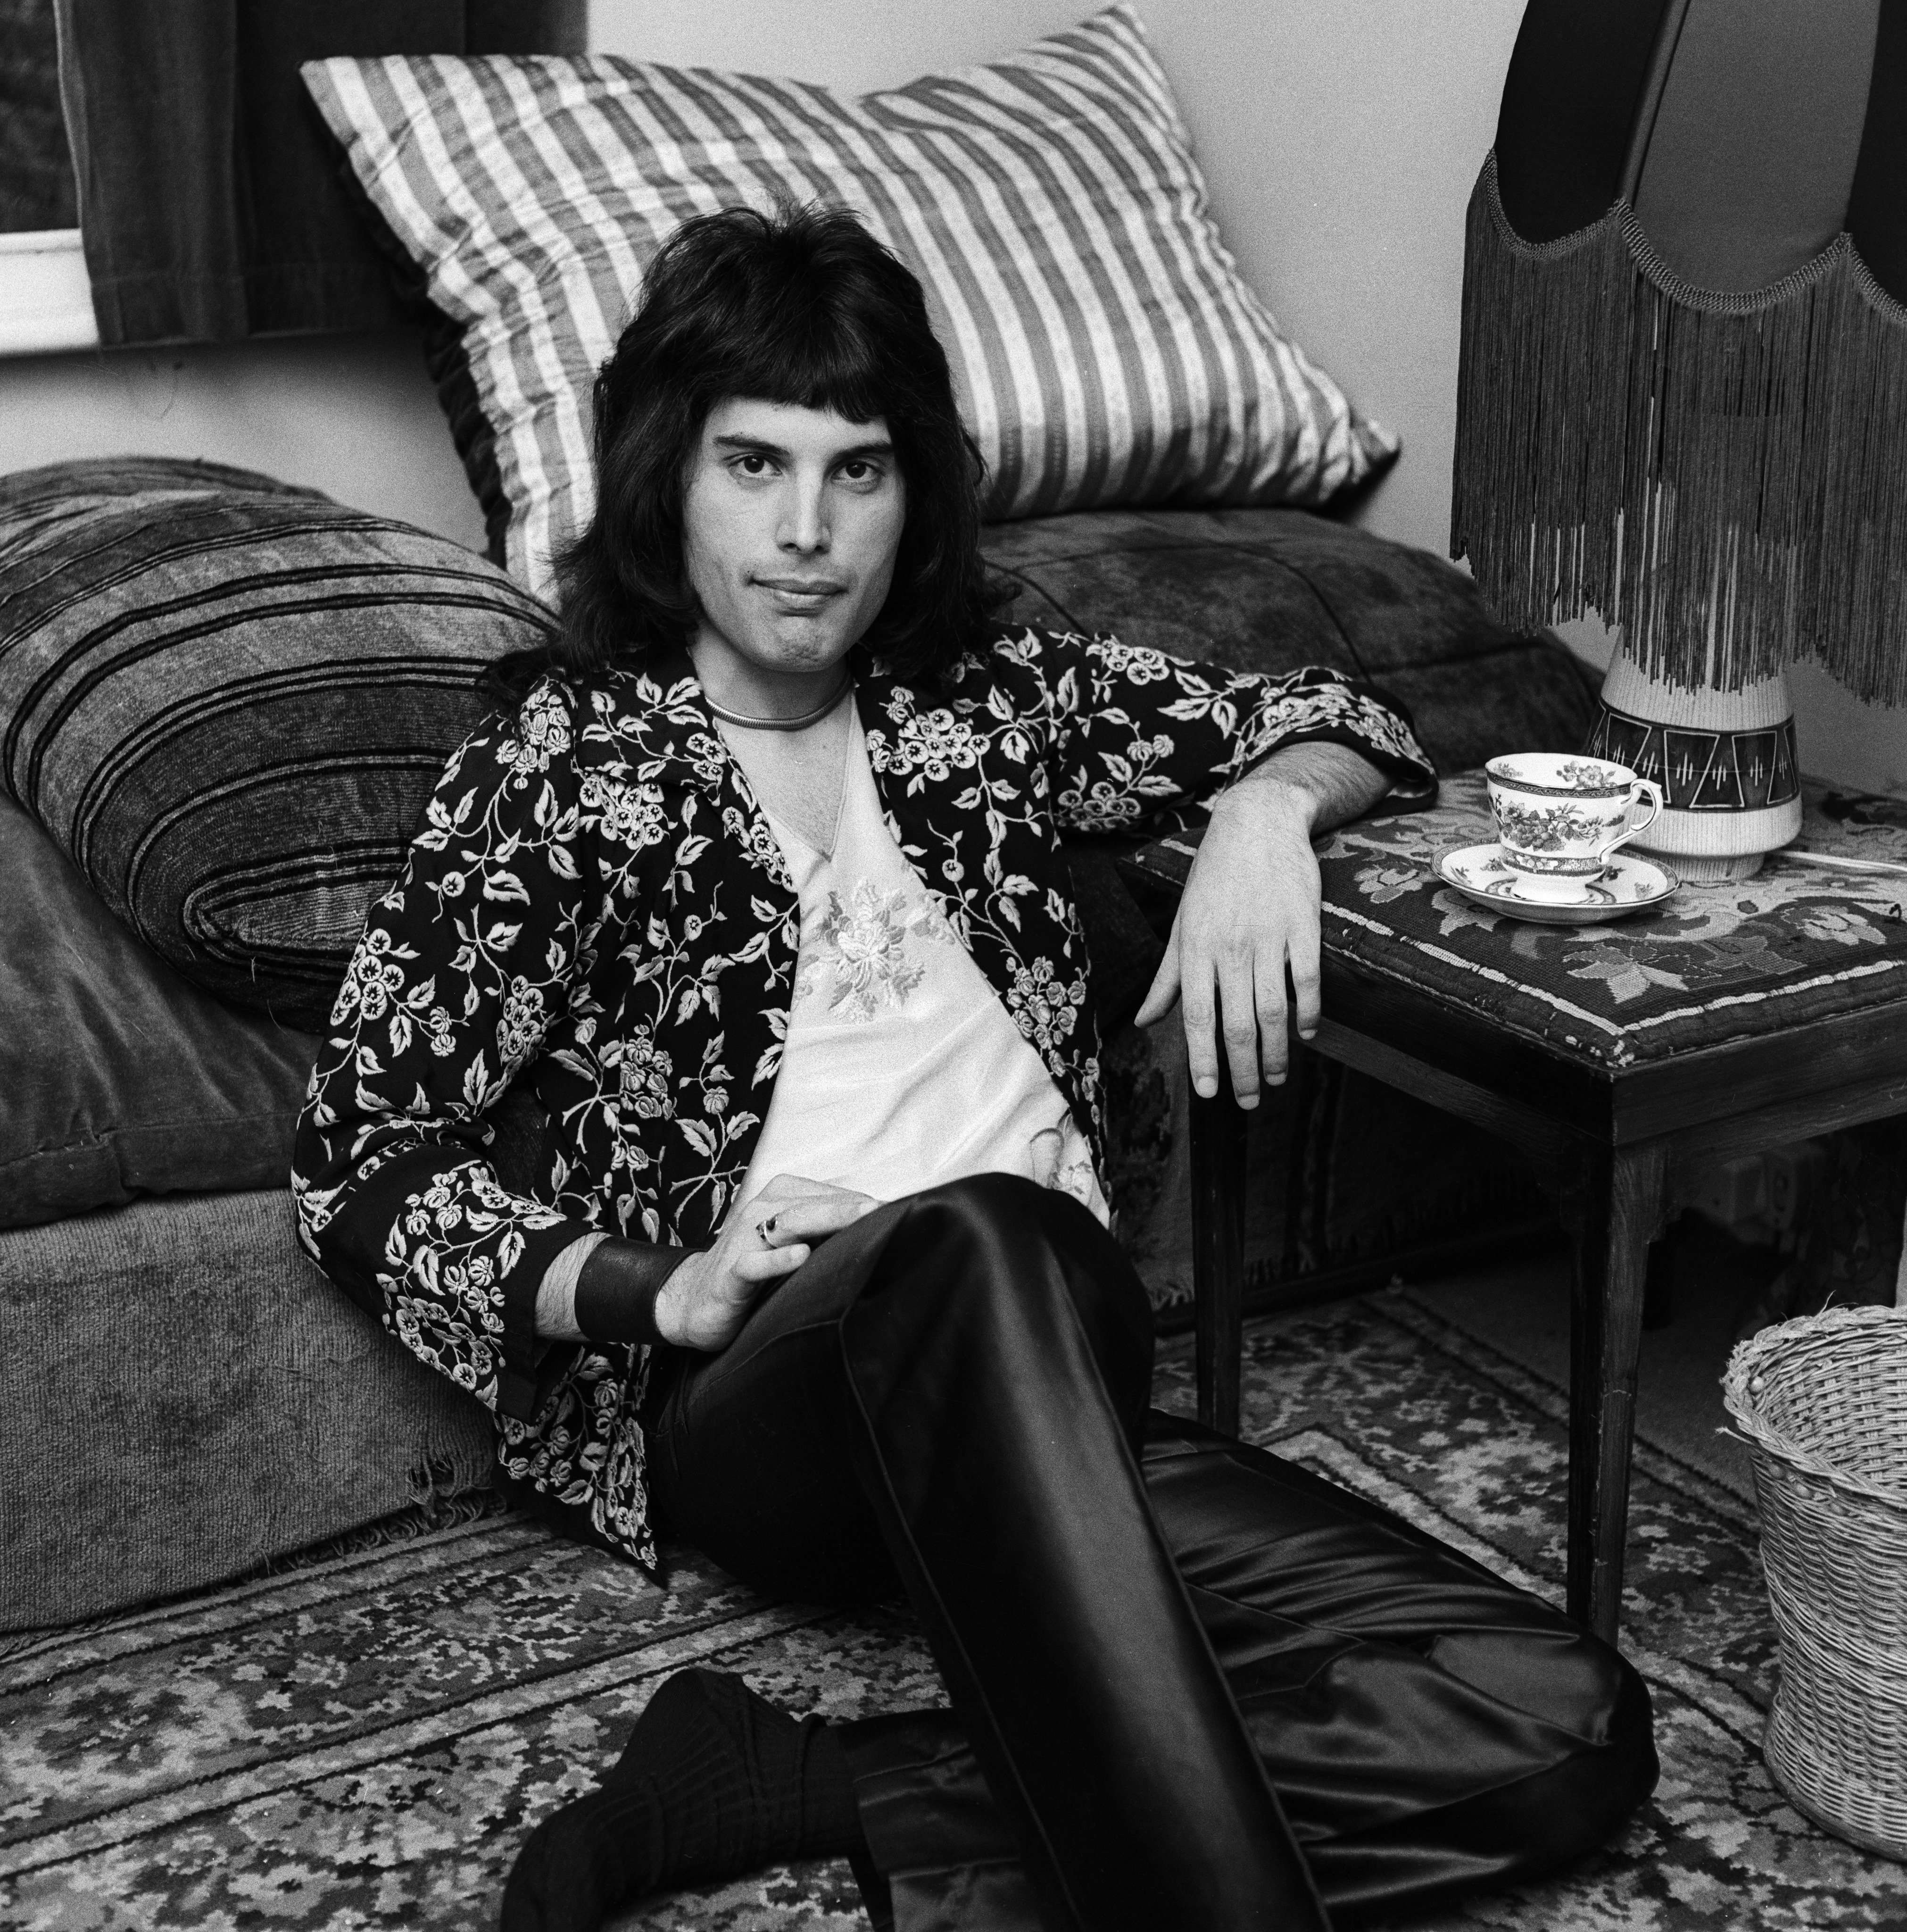 Photo of Freddie Mercury, lead vocalist of the rock band Queen taken on August, 1973. | Photo: Getty Images